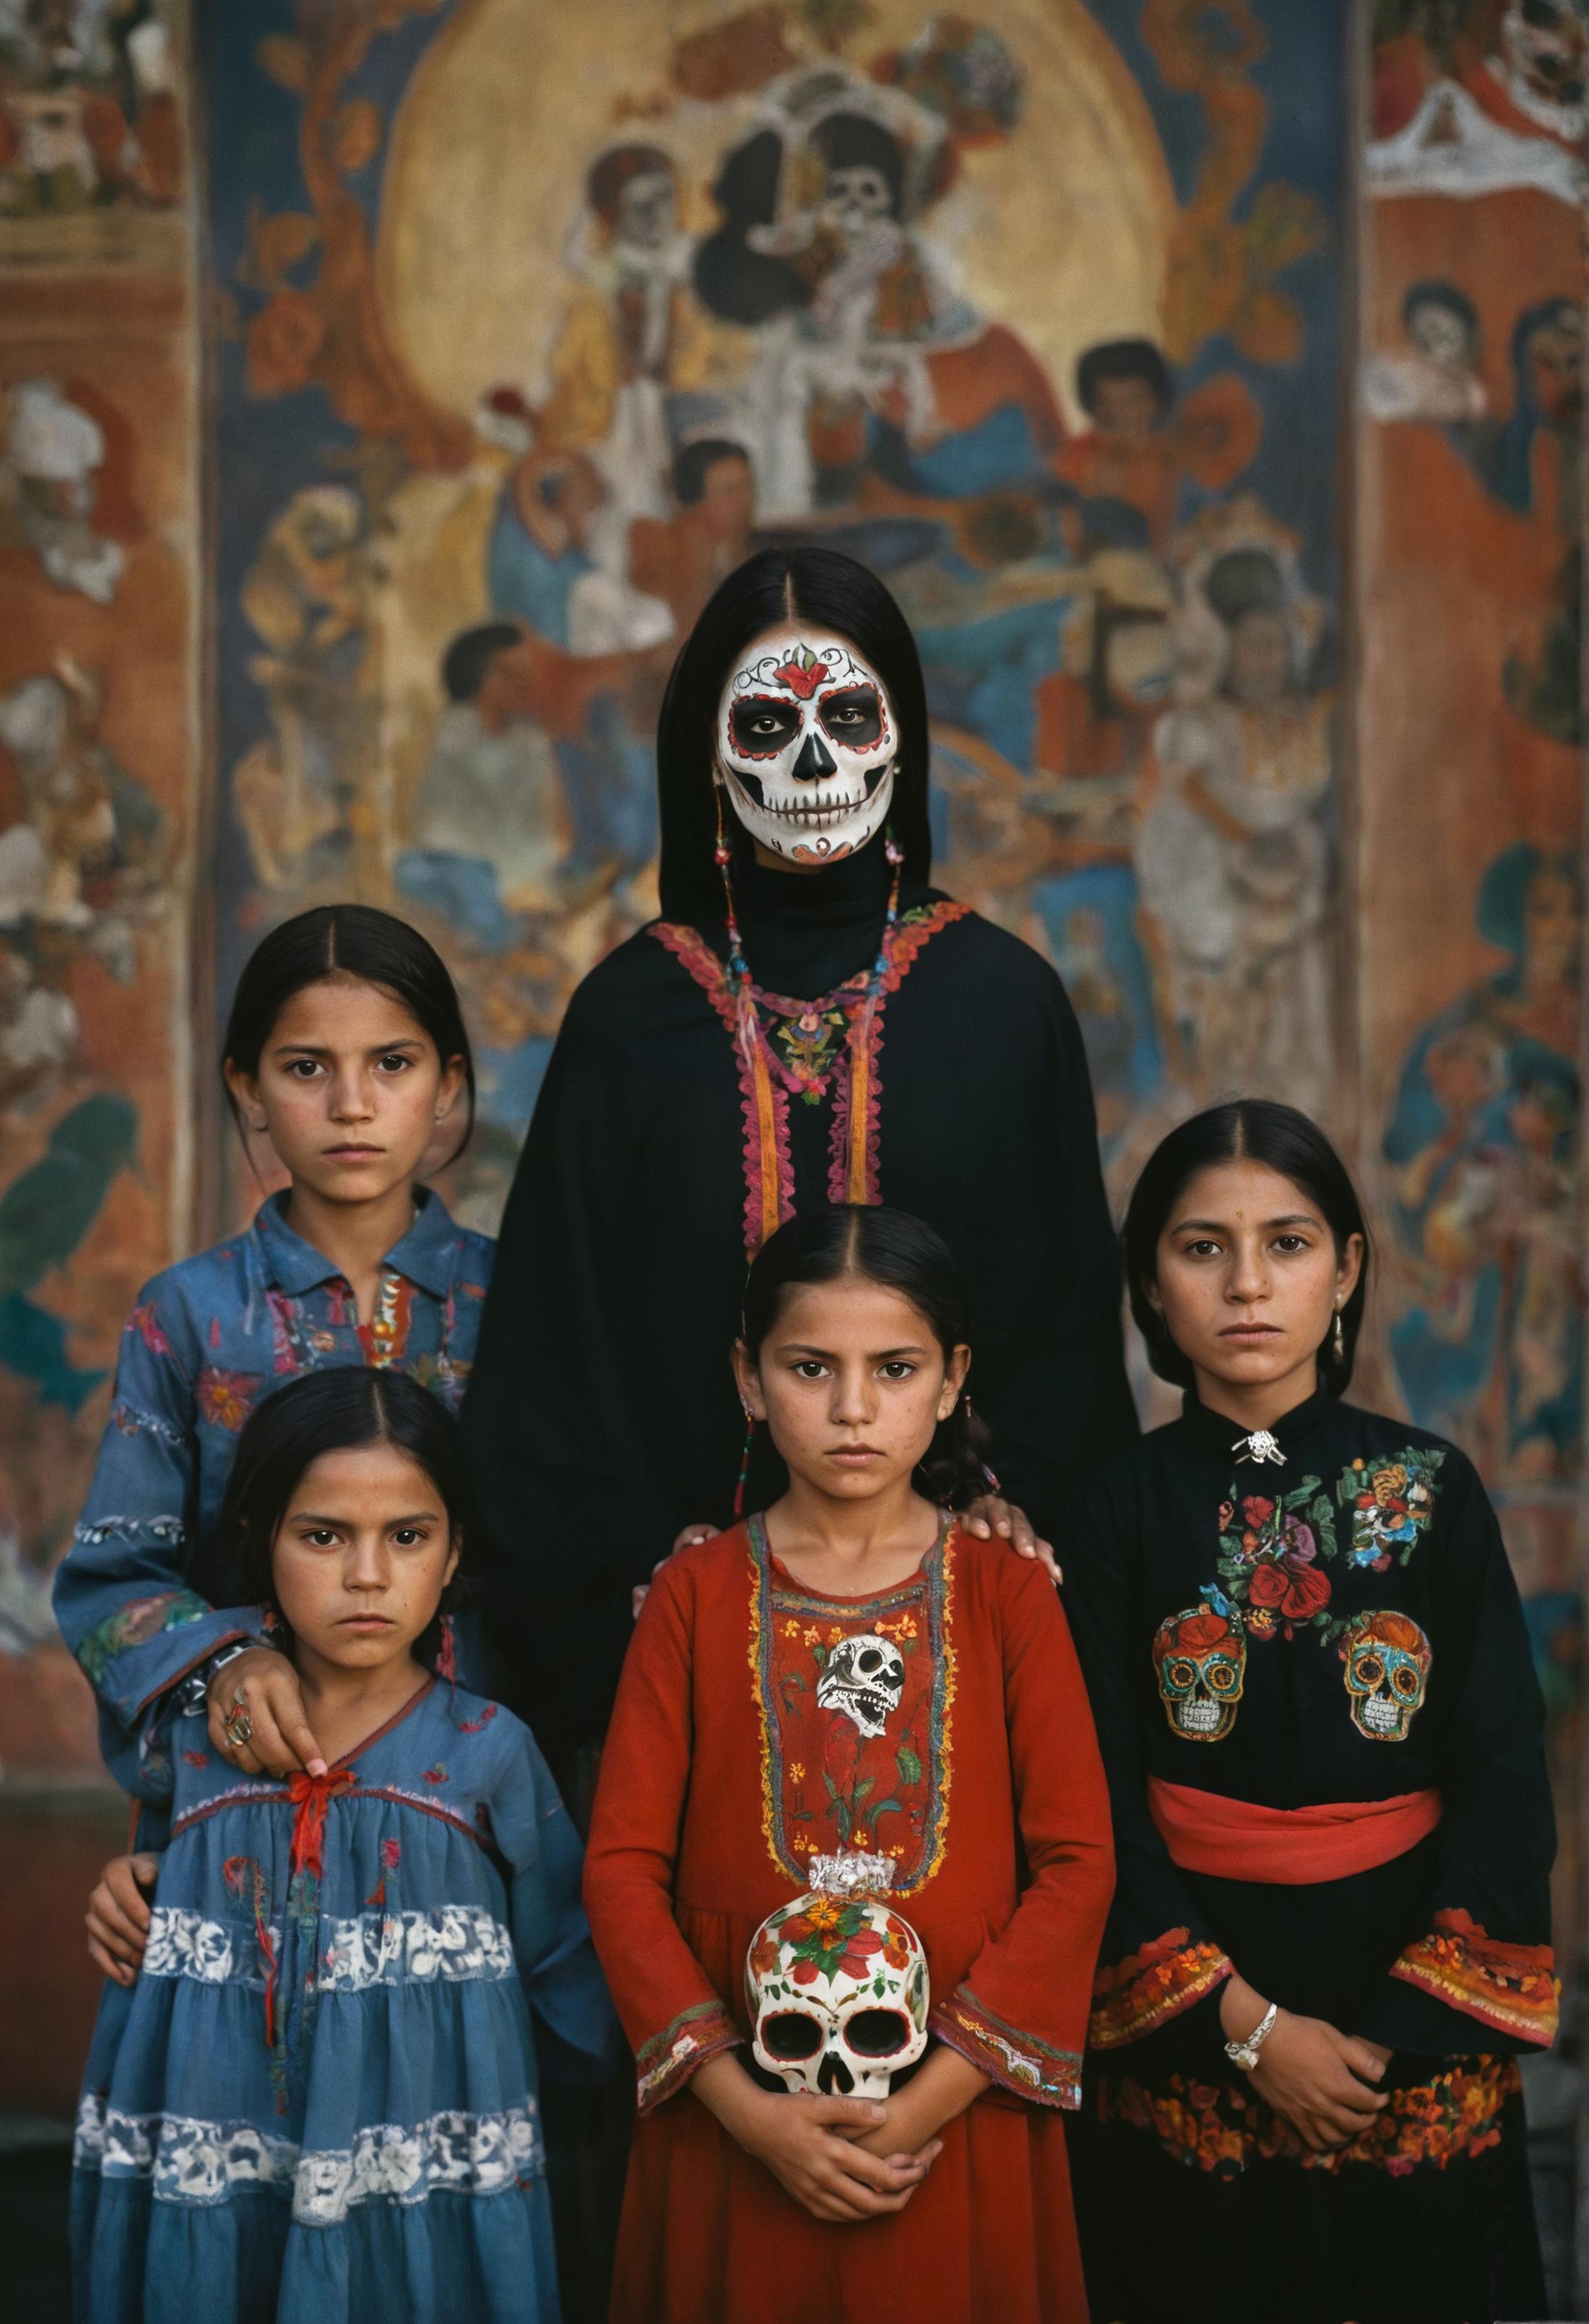 A family of four women posing with a skeleton in the middle.